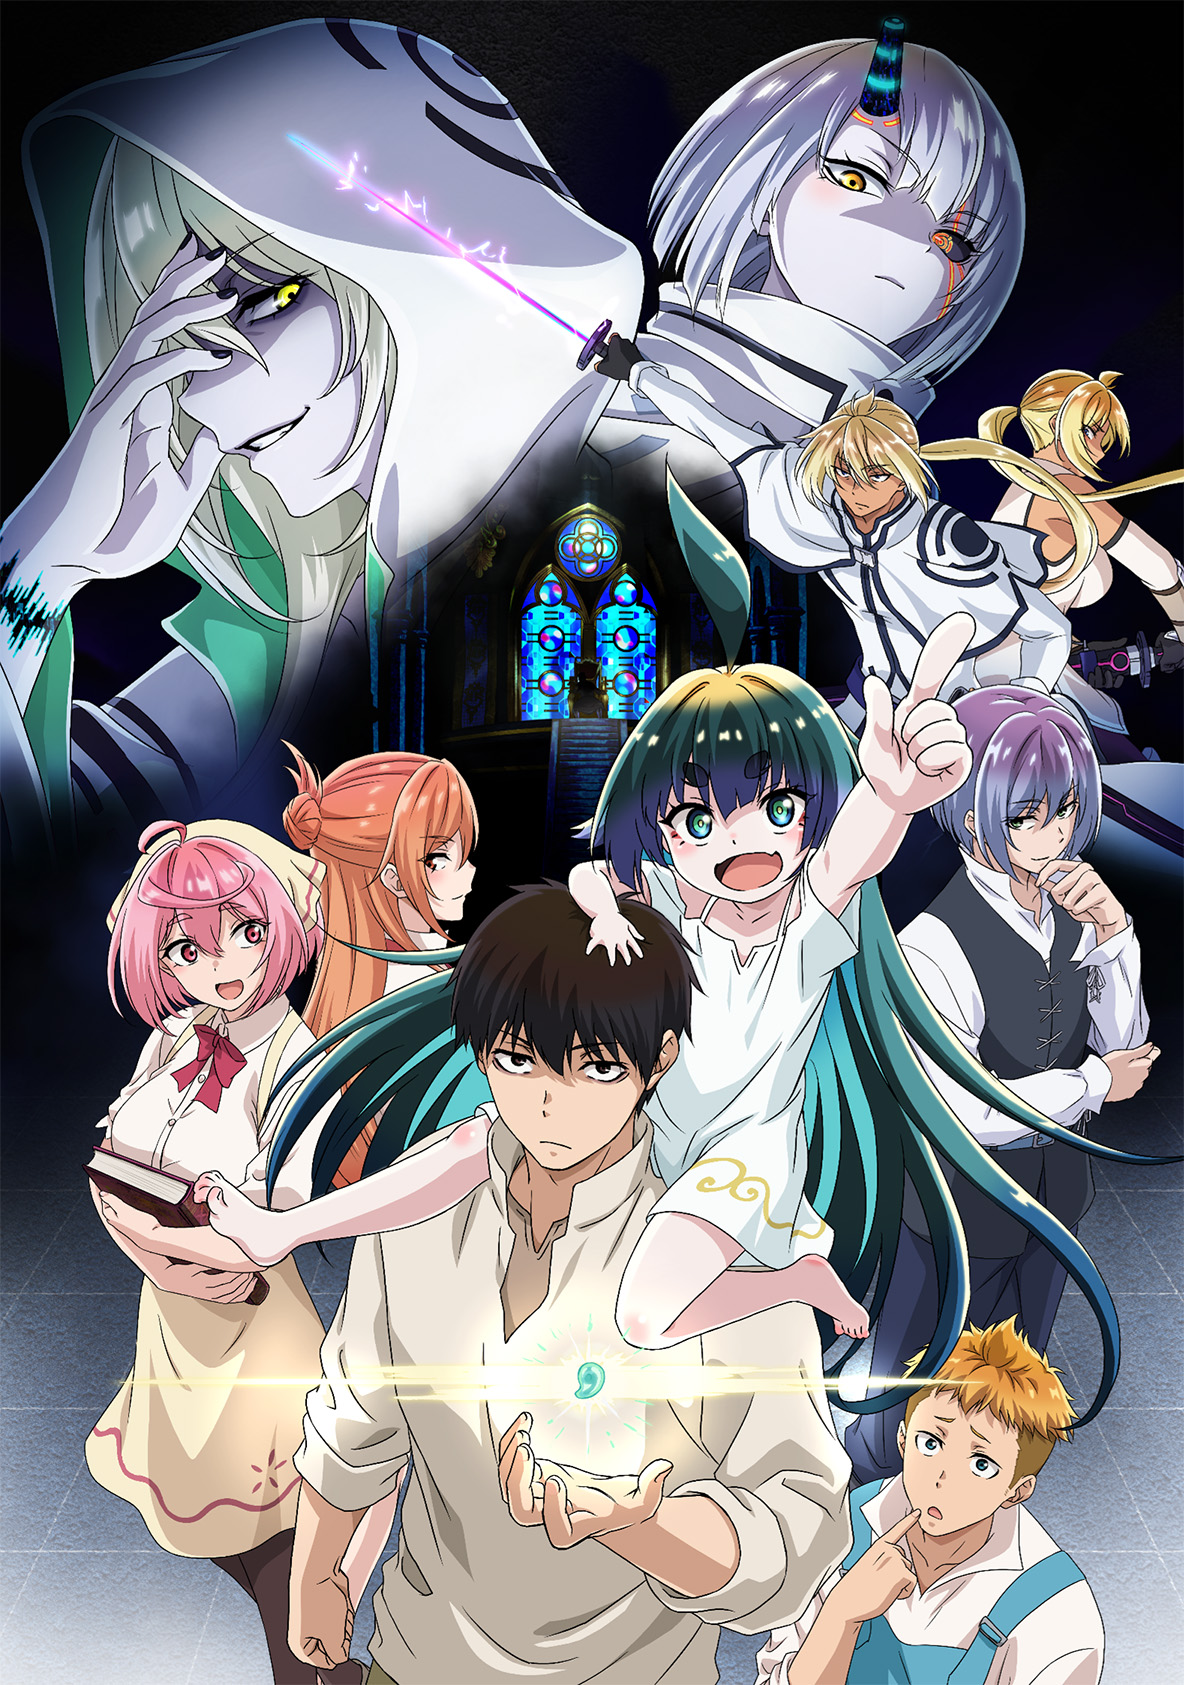 Crunchyroll Adds English Dubs for Science Fell in Love, So I Tried to Prove  it and Somali and the Forest Spirit • Anime UK News